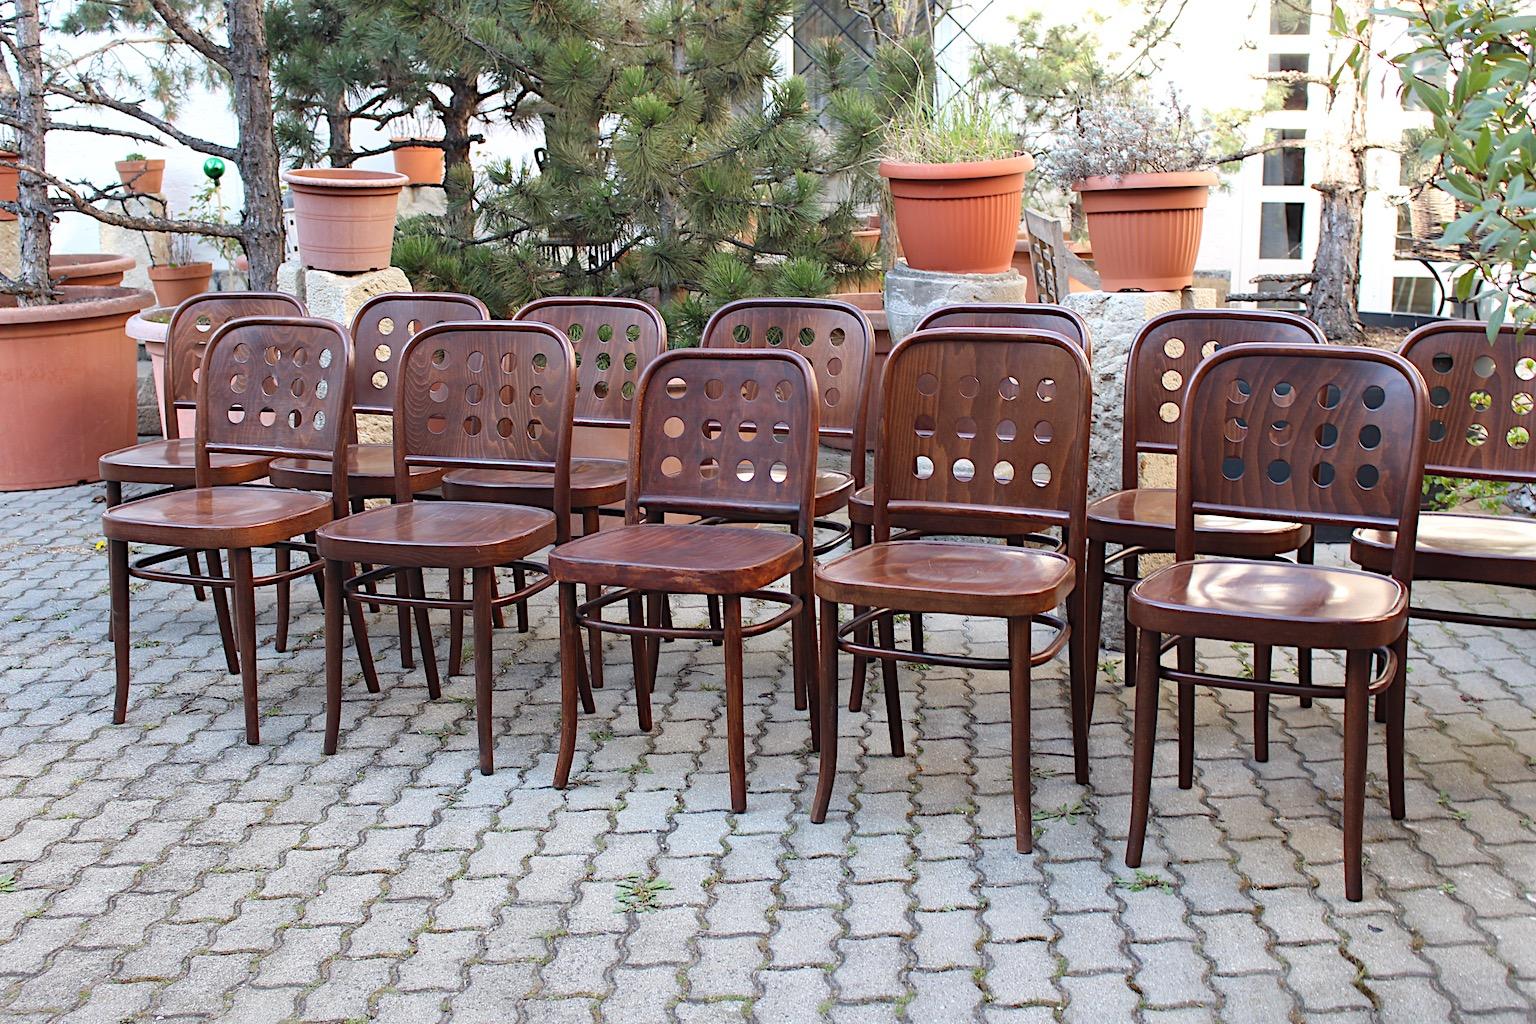 Josef Hoffmann style 8 vintage dining chairs from beech bentwood in chocolate brown color tone 1990s in an amazing shape.
While the backrest features 12 holes for an interesting form, the seat invites with for a comfortable seating.
The dining